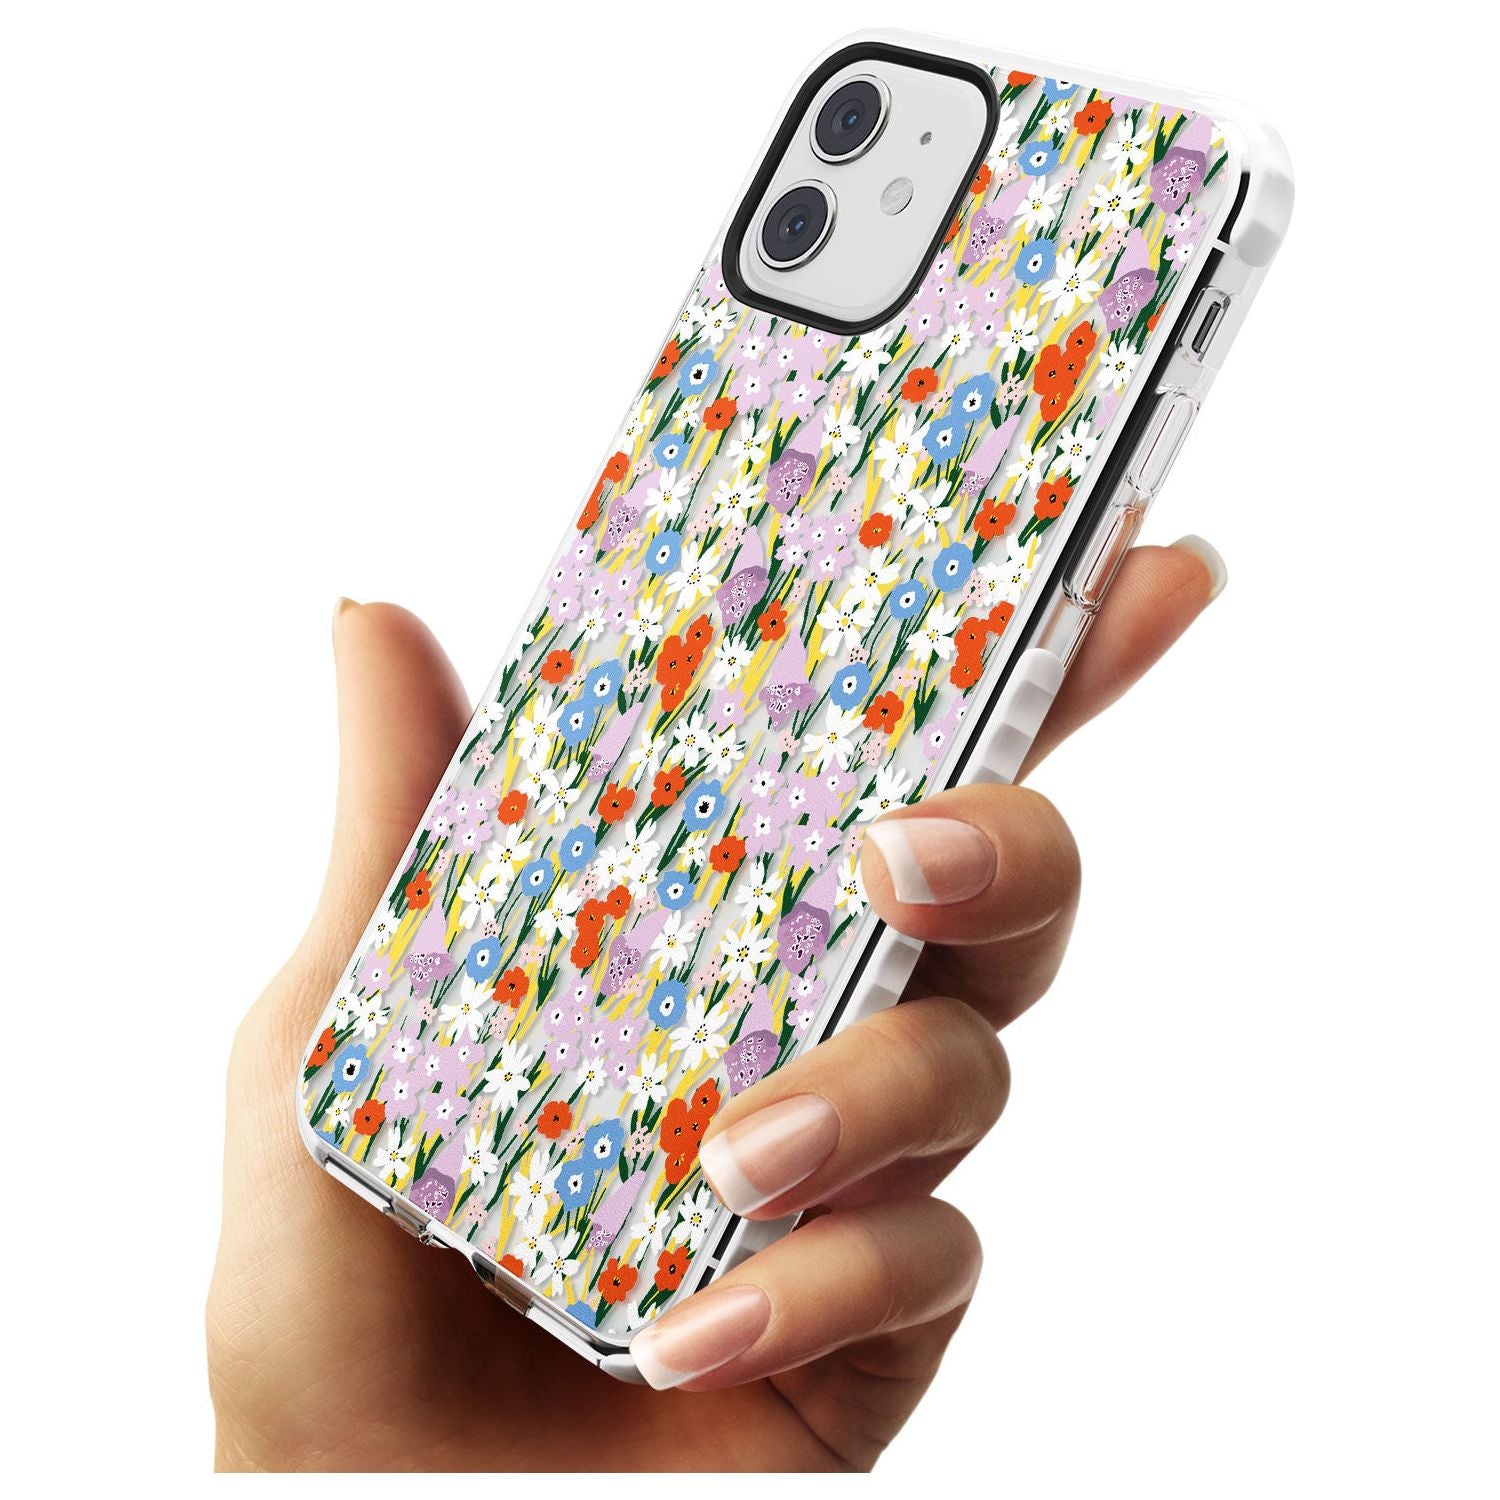 Energetic Floral Mix: Transparent Slim TPU Phone Case for iPhone 11